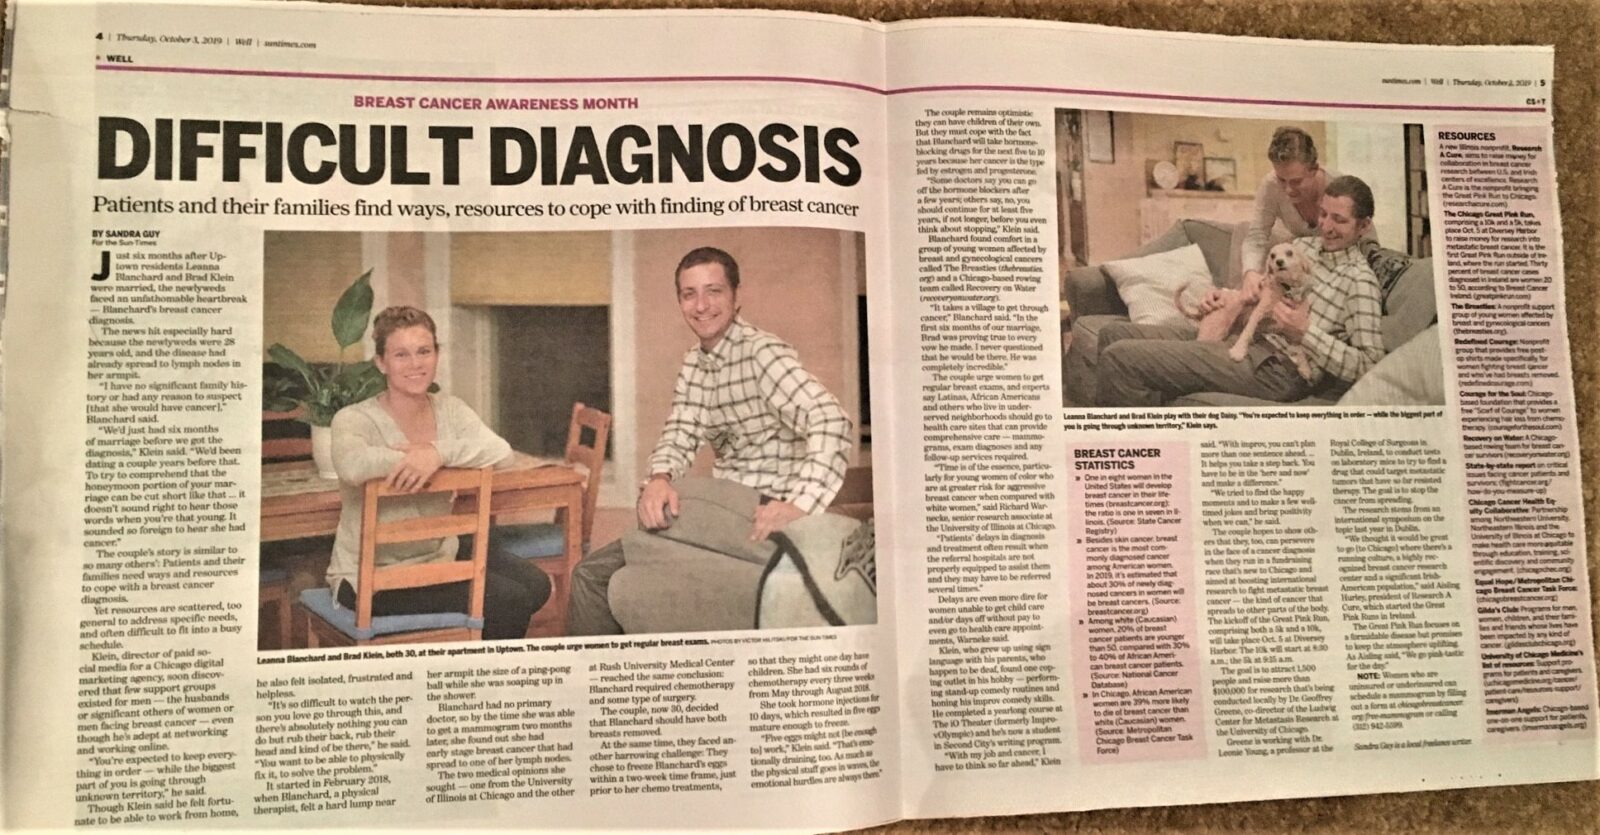 Chicago Sun-Times October 1, 2019 feature: "Difficult Diagnosis"